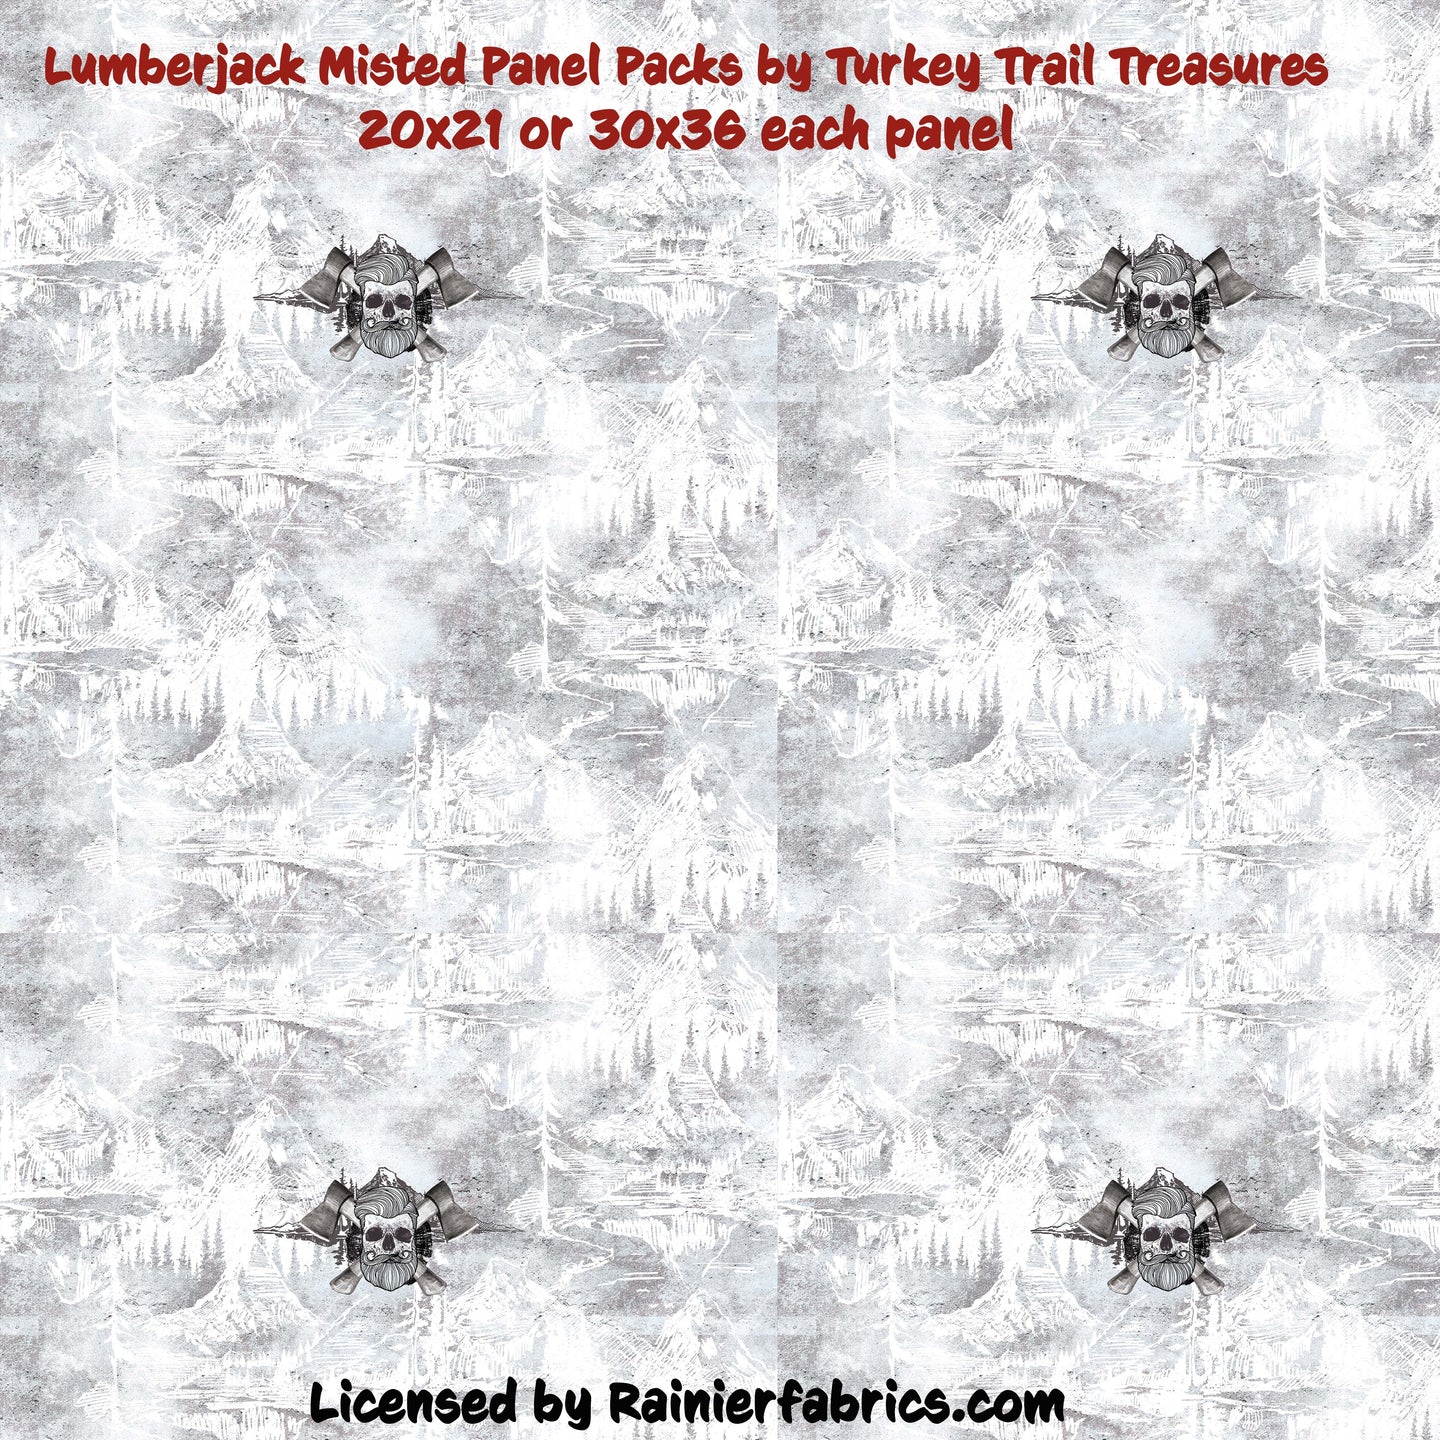 Lumberjack Misted Panel Packs by Turkey Trail Treasures 20x21 or 30x36 each panel- 2-5 day turnaround - Order by 1/2 yard; Description of bases below